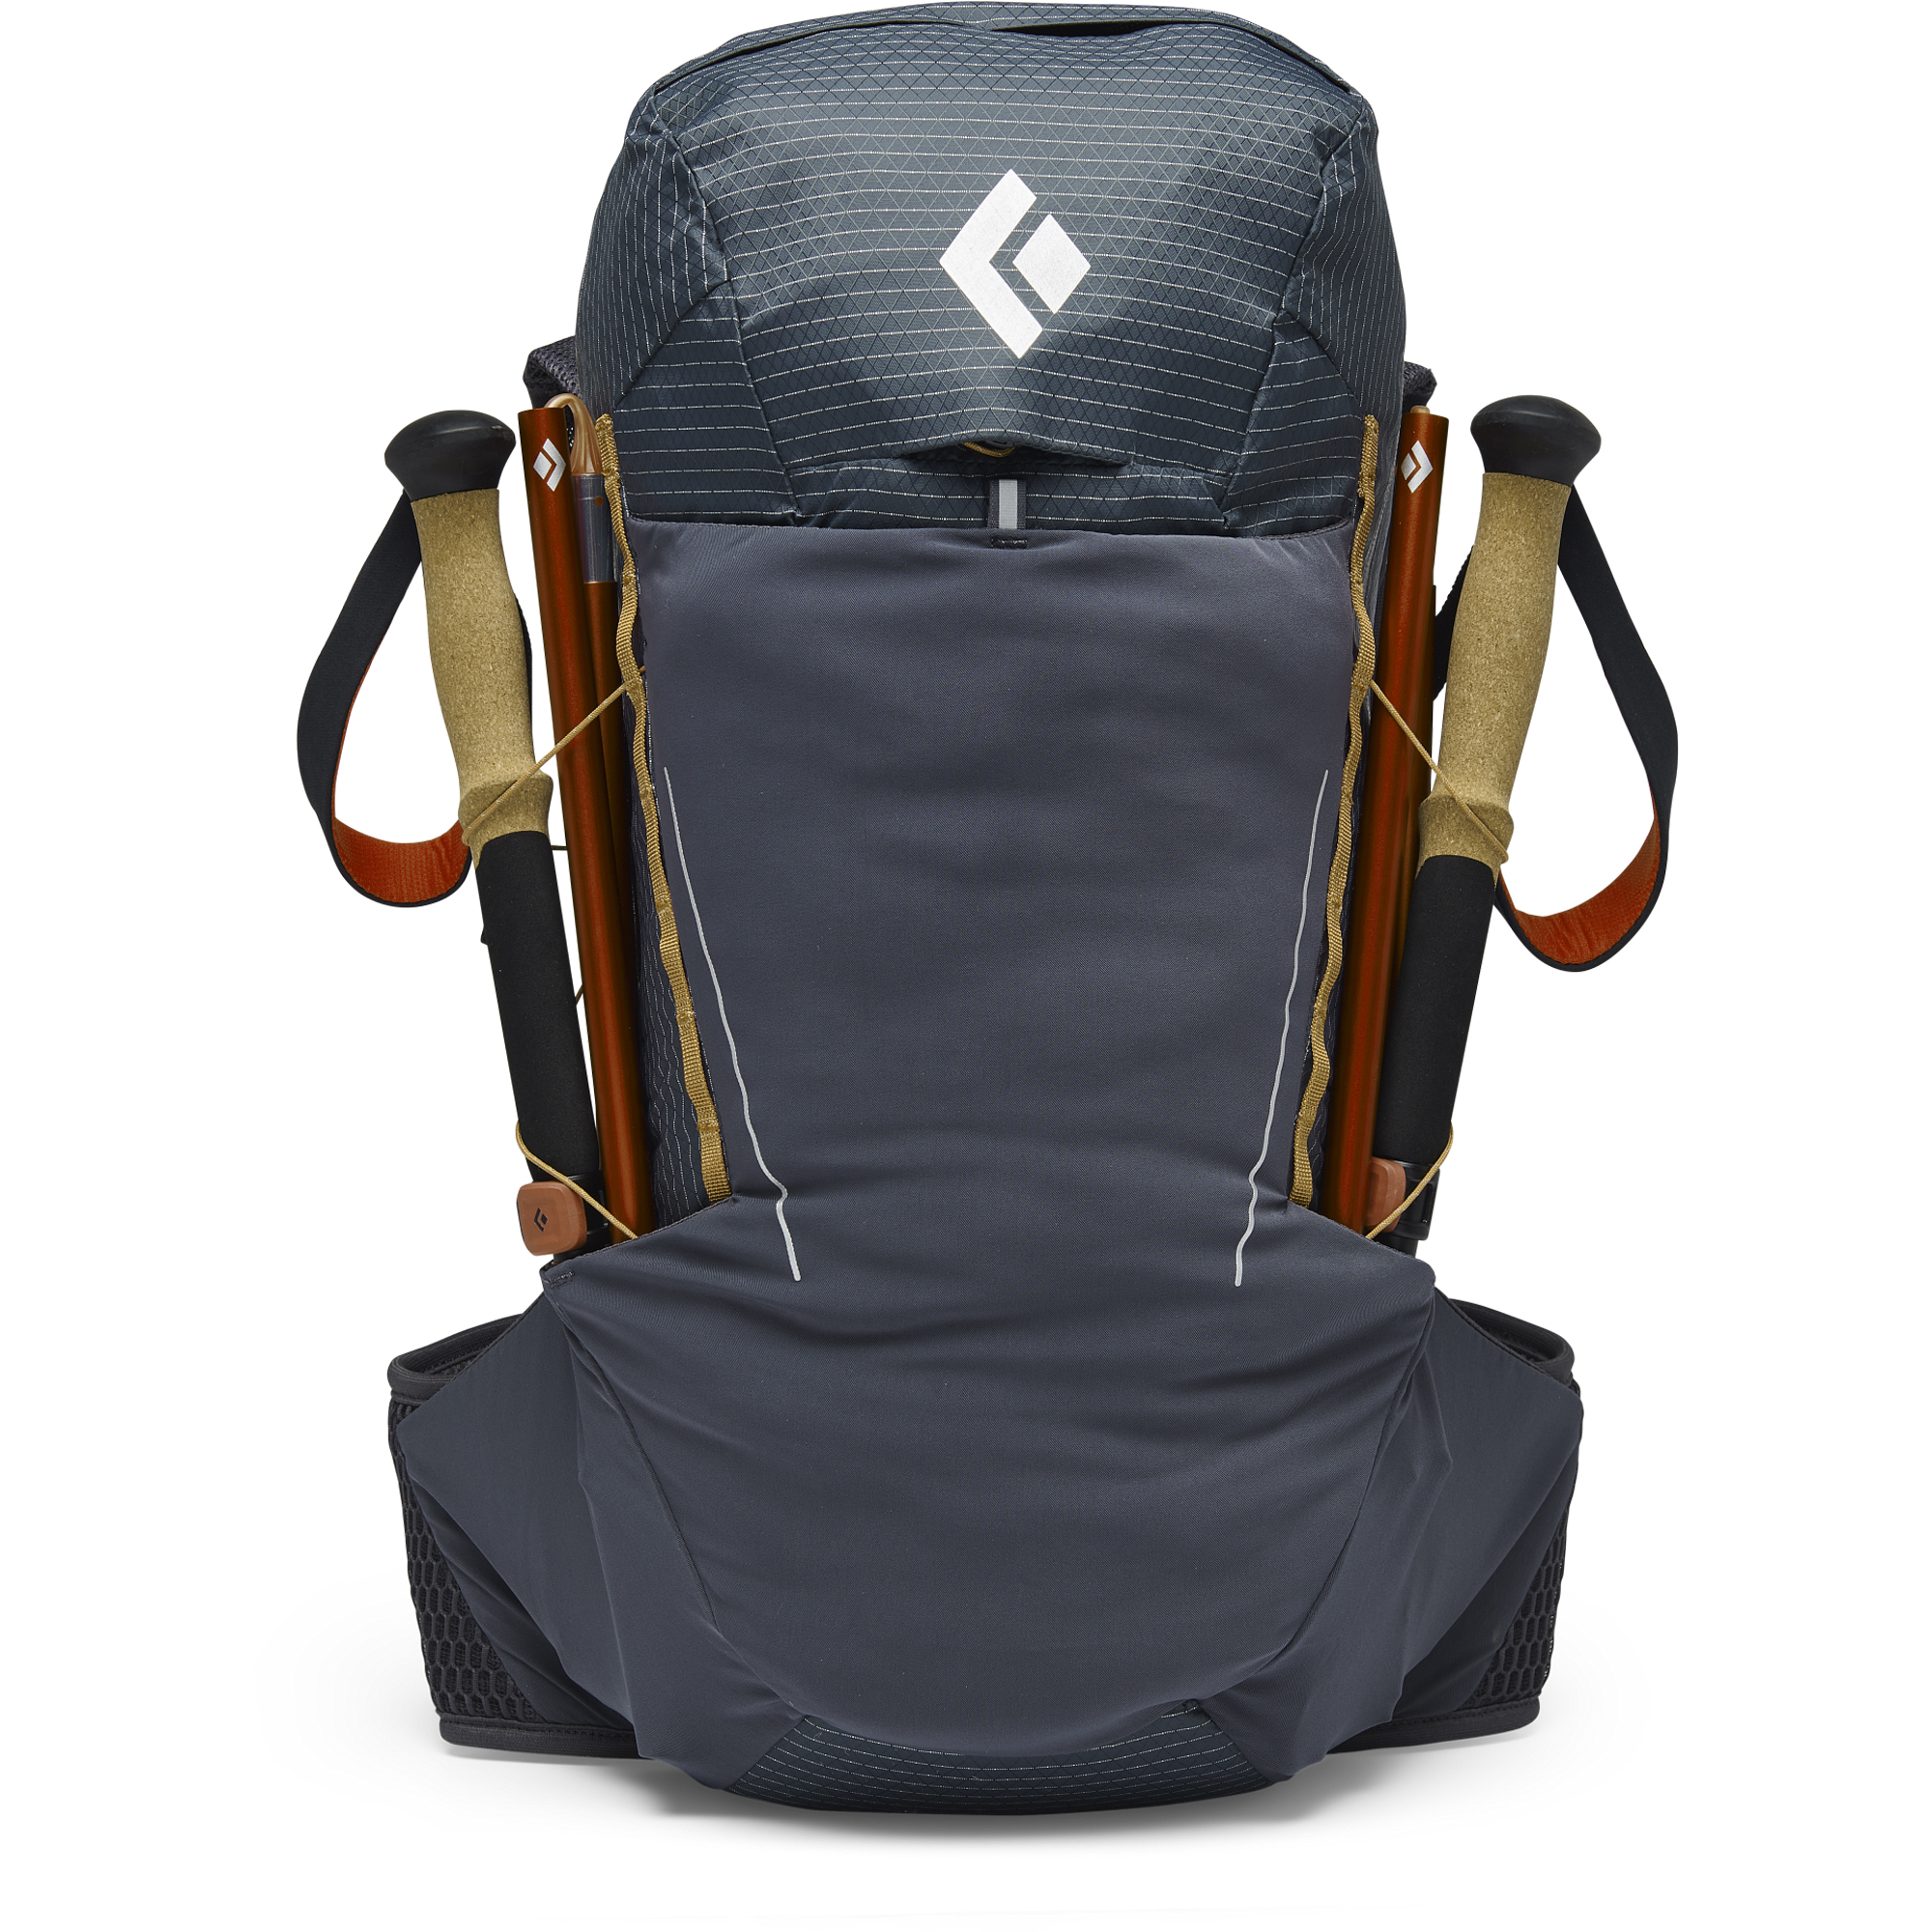 Black Diamond Pursuit 30 Hiking Backpack/Day Pack